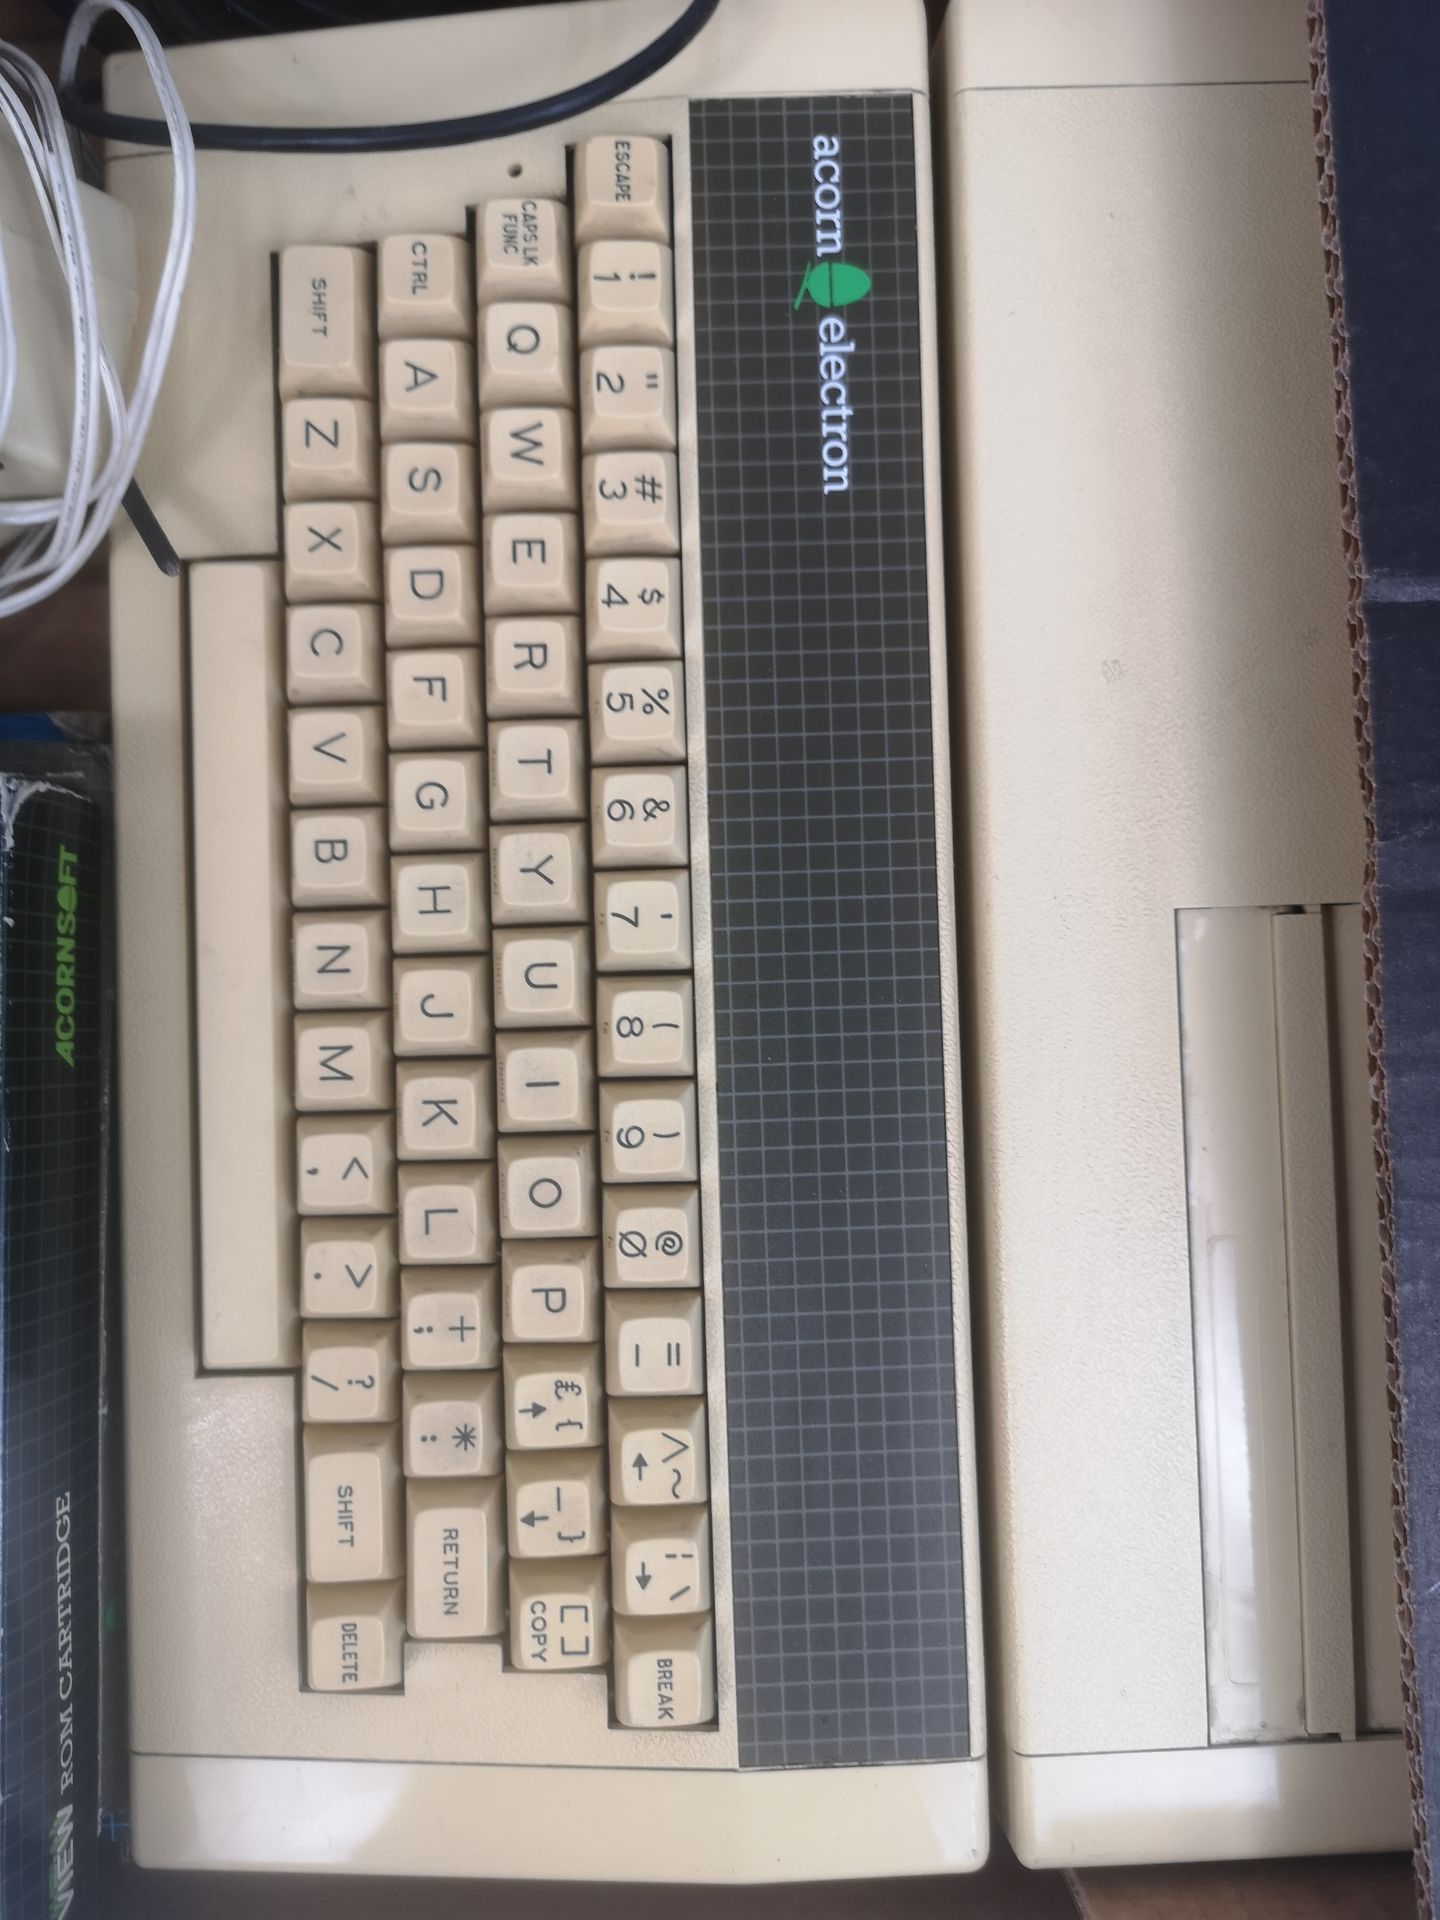 Acorn electron computer and games - Image 2 of 5